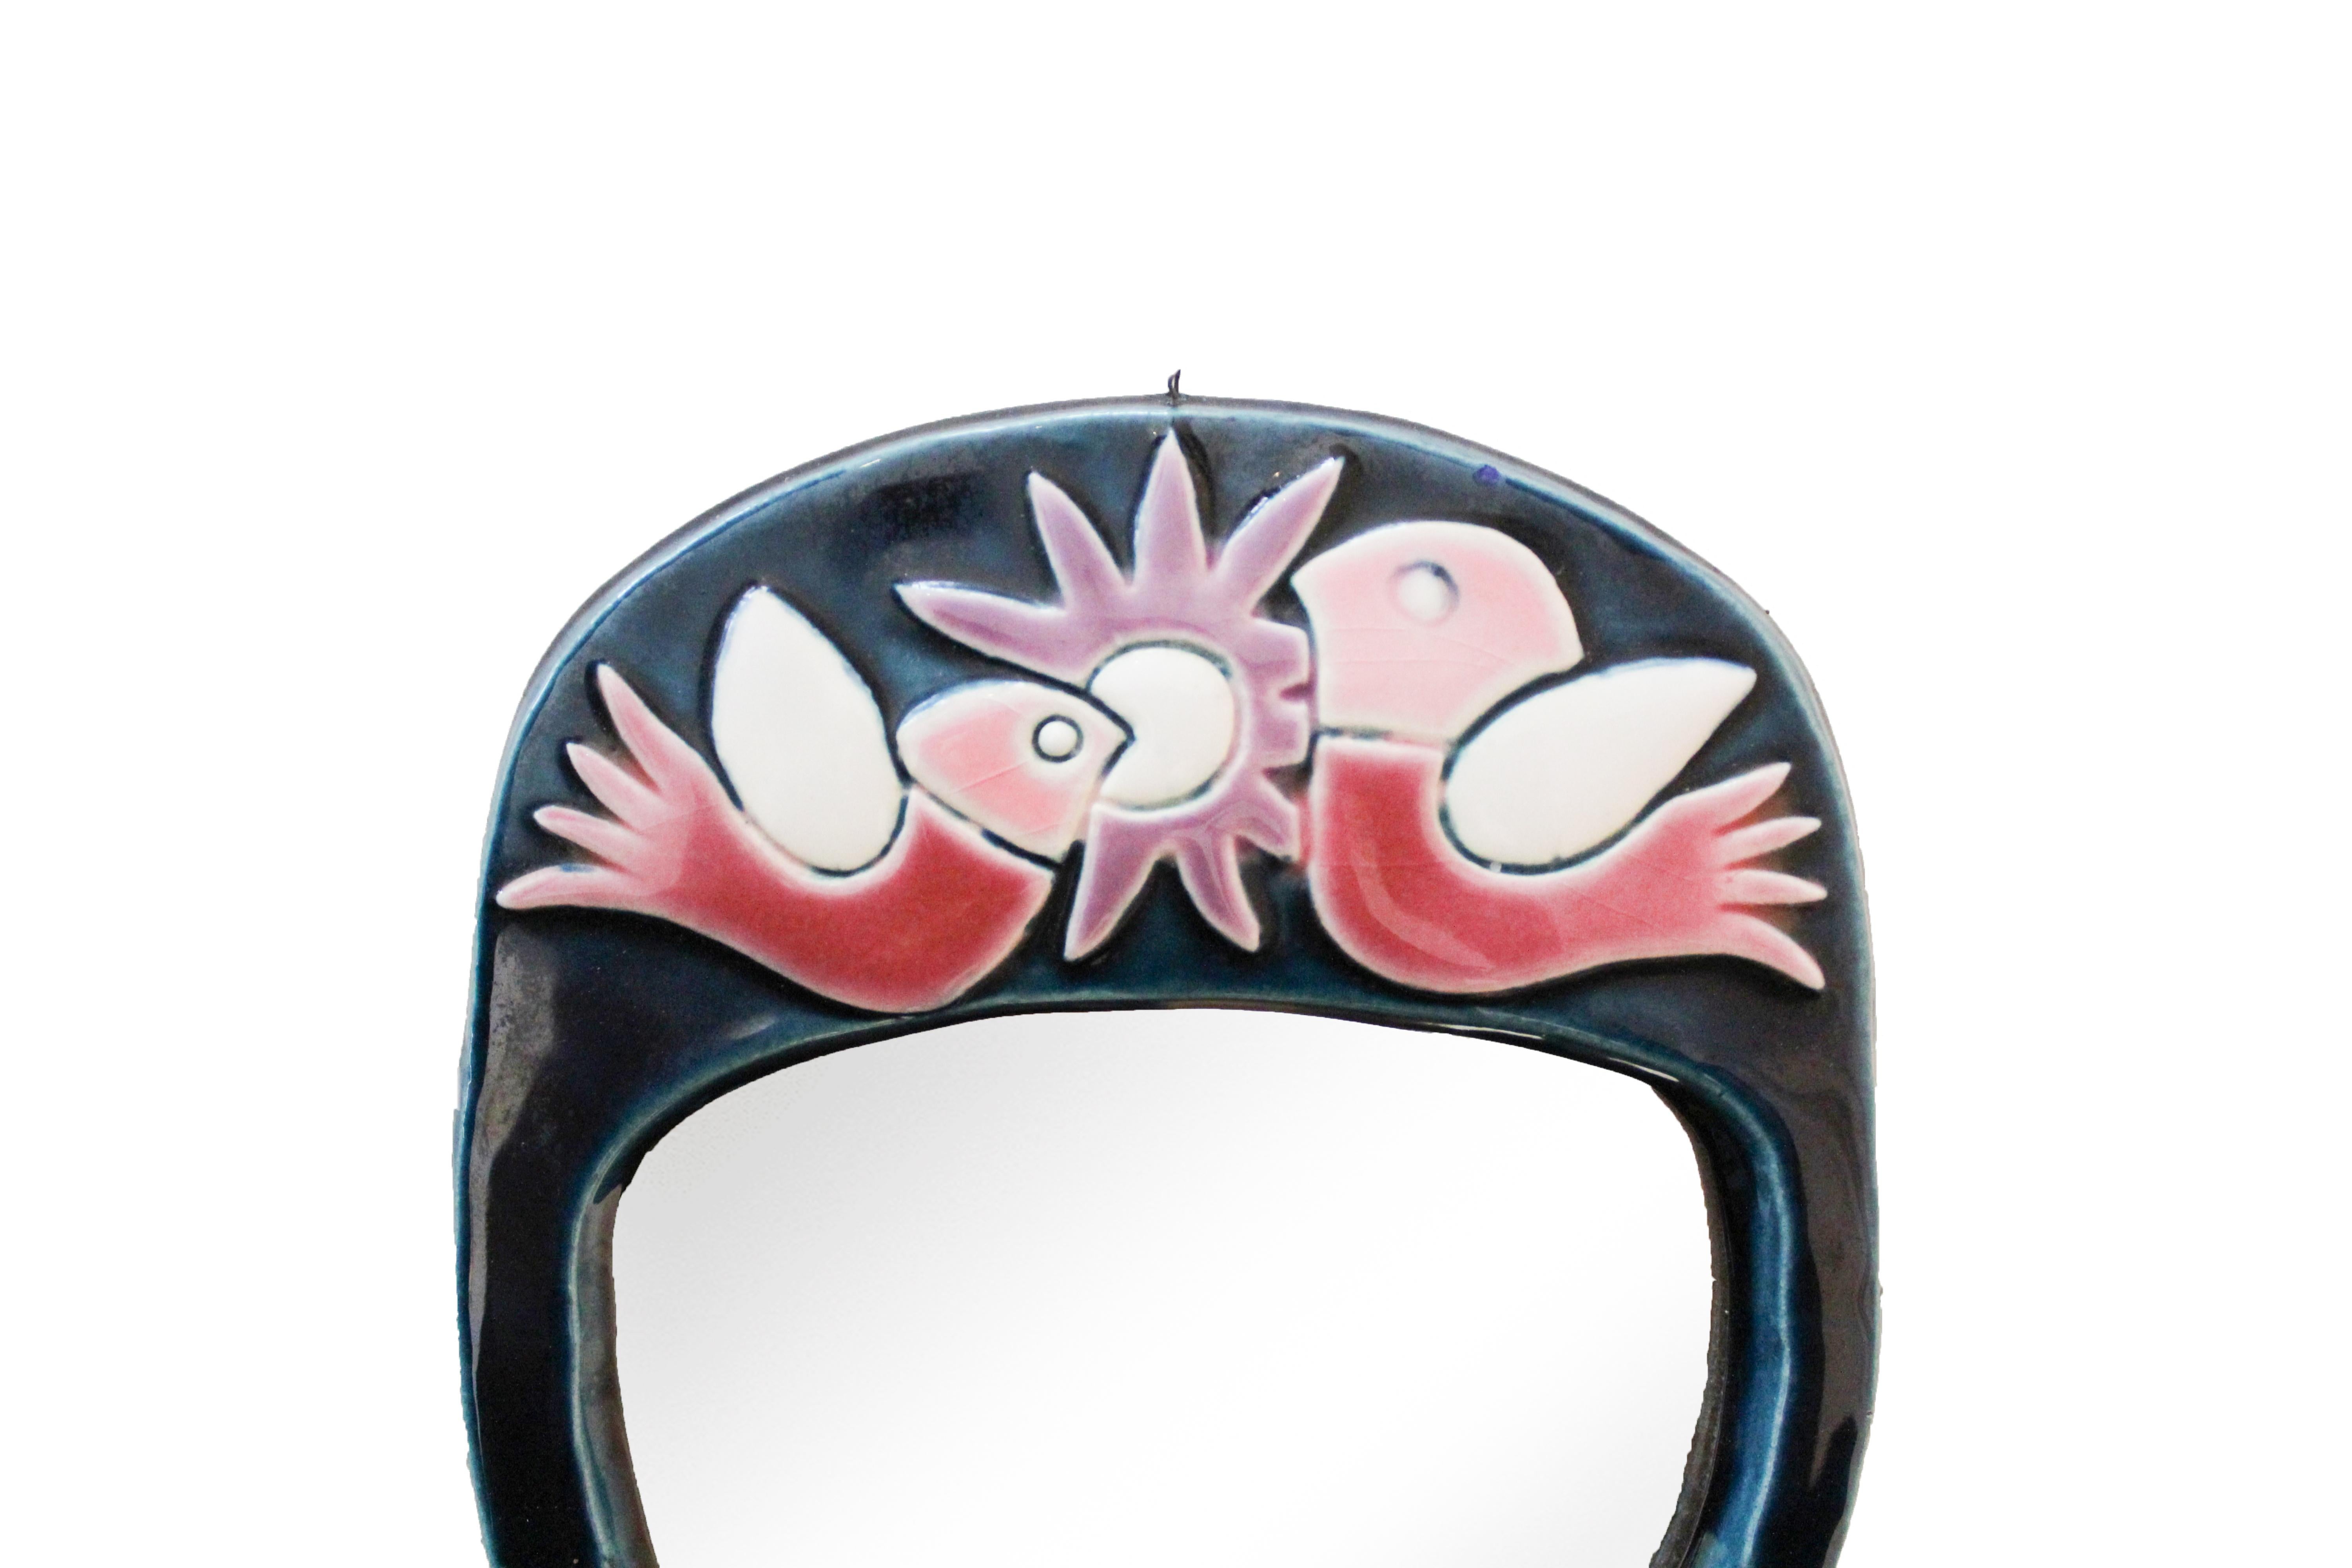 Mithé Espelt ceramic hand mirror, circa 1960, France.
Glazed embossed earthenware.
Iconic mirror decorated with birds.
Original felt backing.
Circa 1960, France.
Very good condition.
The life of Mithé Espelt is a real saga. Born in 1923 in